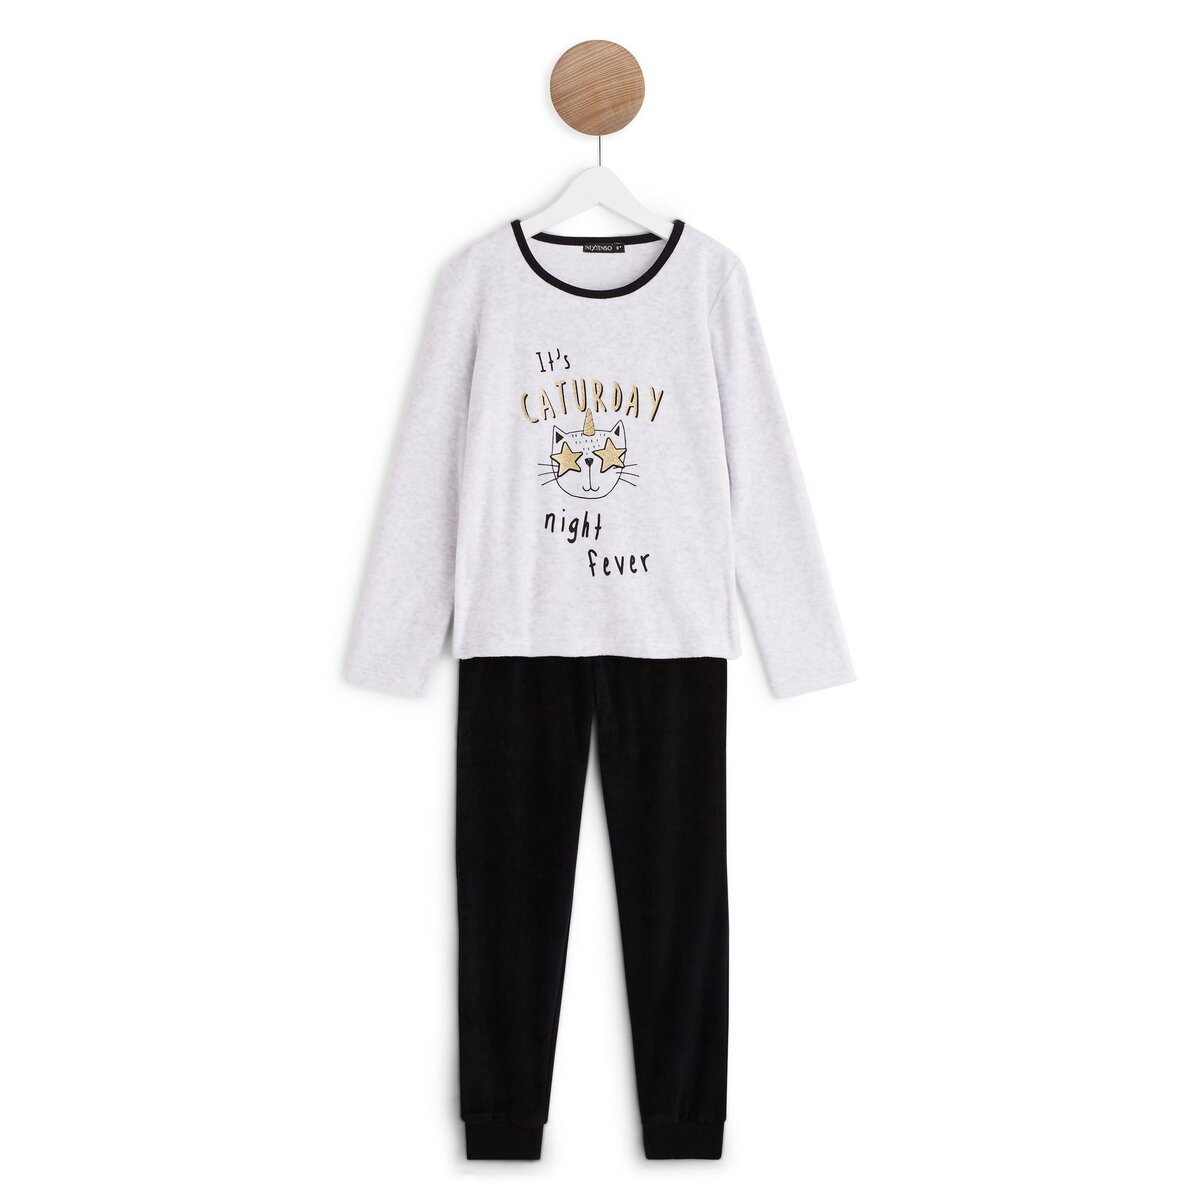 IN EXTENSO Ensemble pyjama velours chat fille